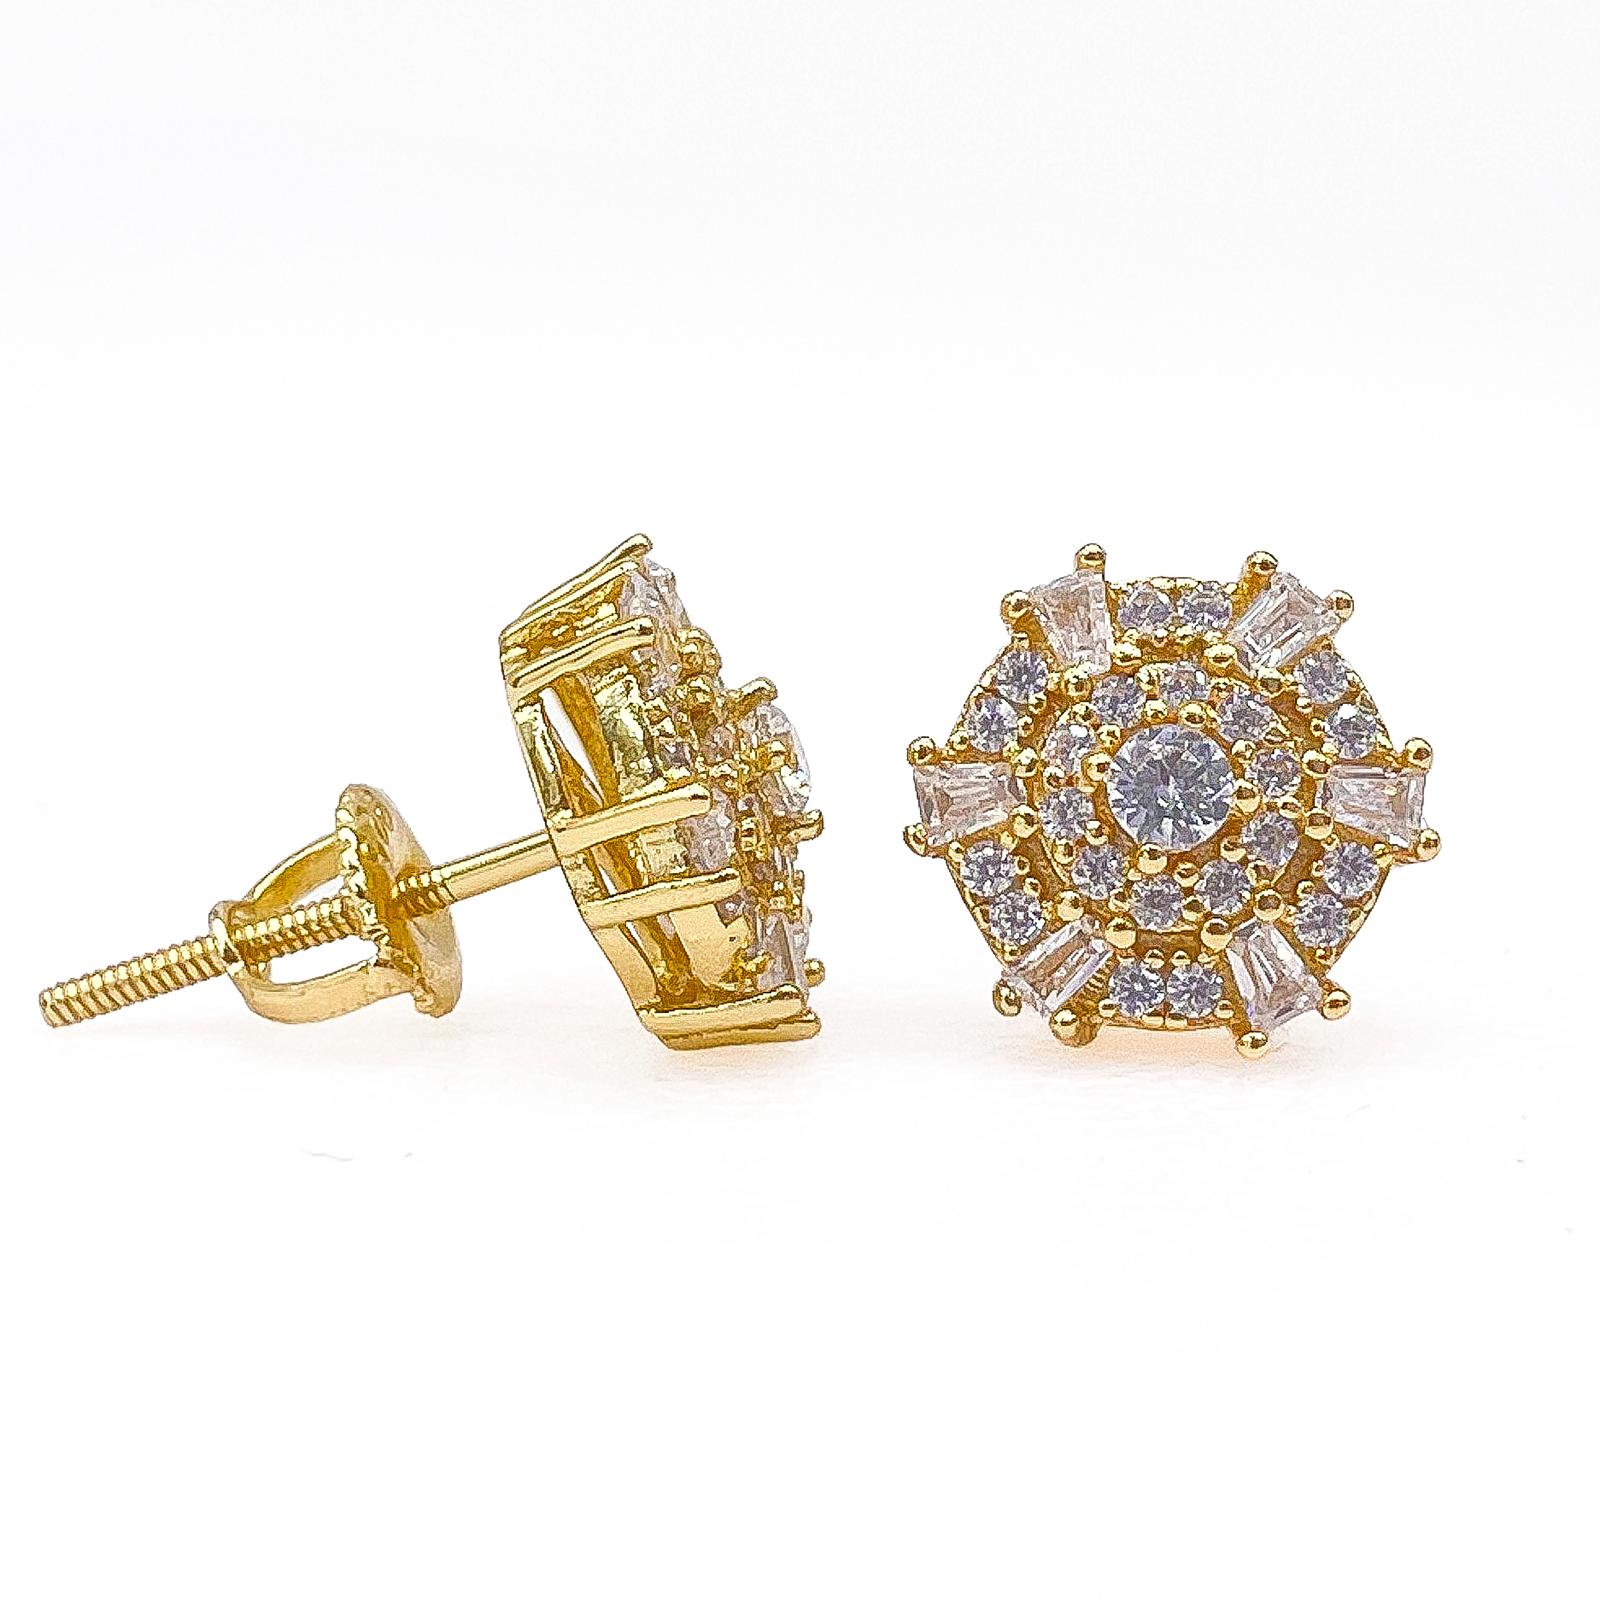 Icy 925 Baguette Micro Pave Earring 14K Gold Finish VVS Cubic Zircon  Crystals / Authentic 925 Sterling Silver Screw Back Earrings